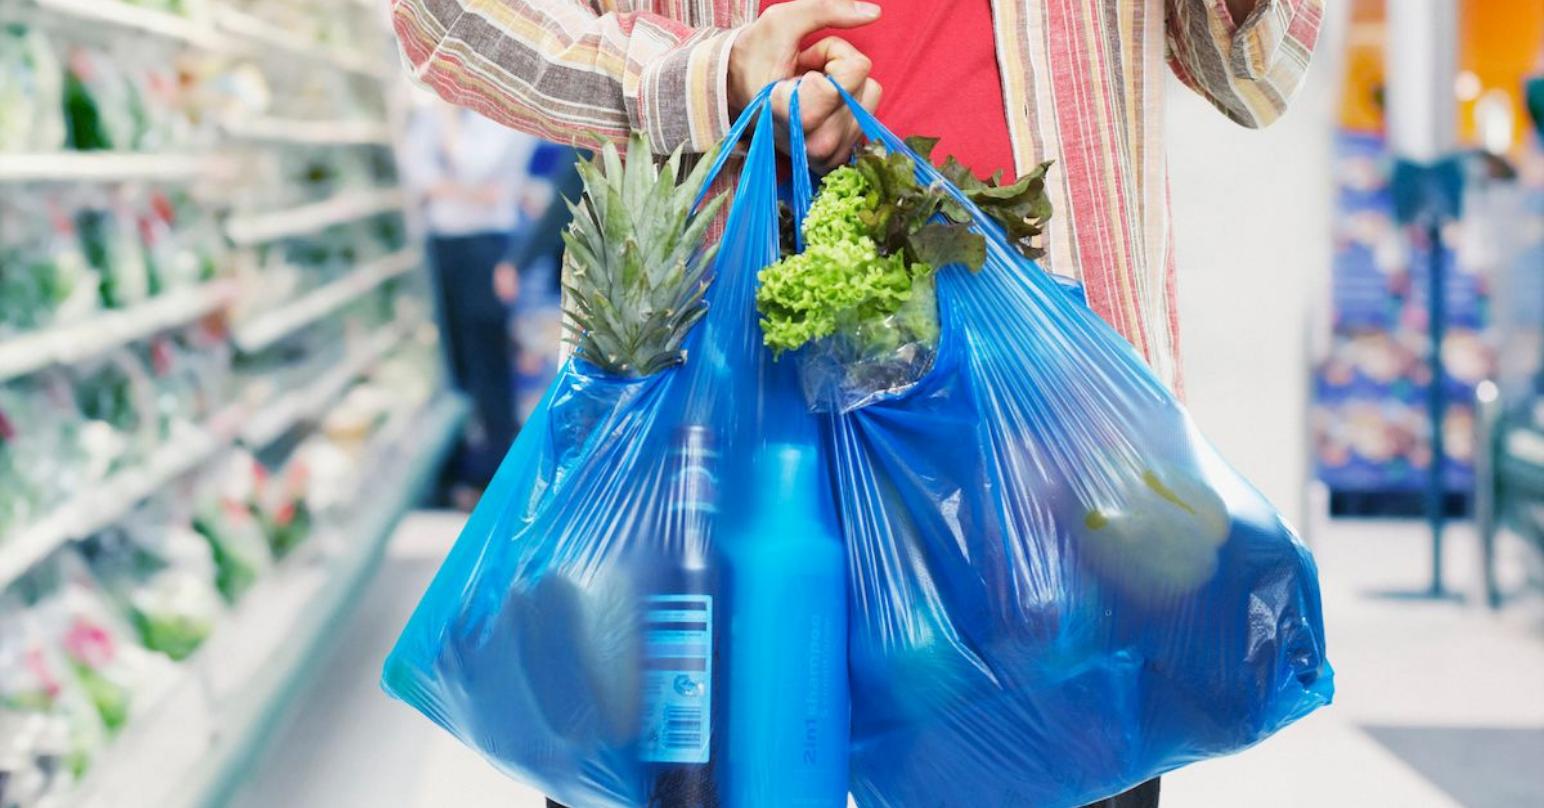 traditional retail - plastic grocery bags